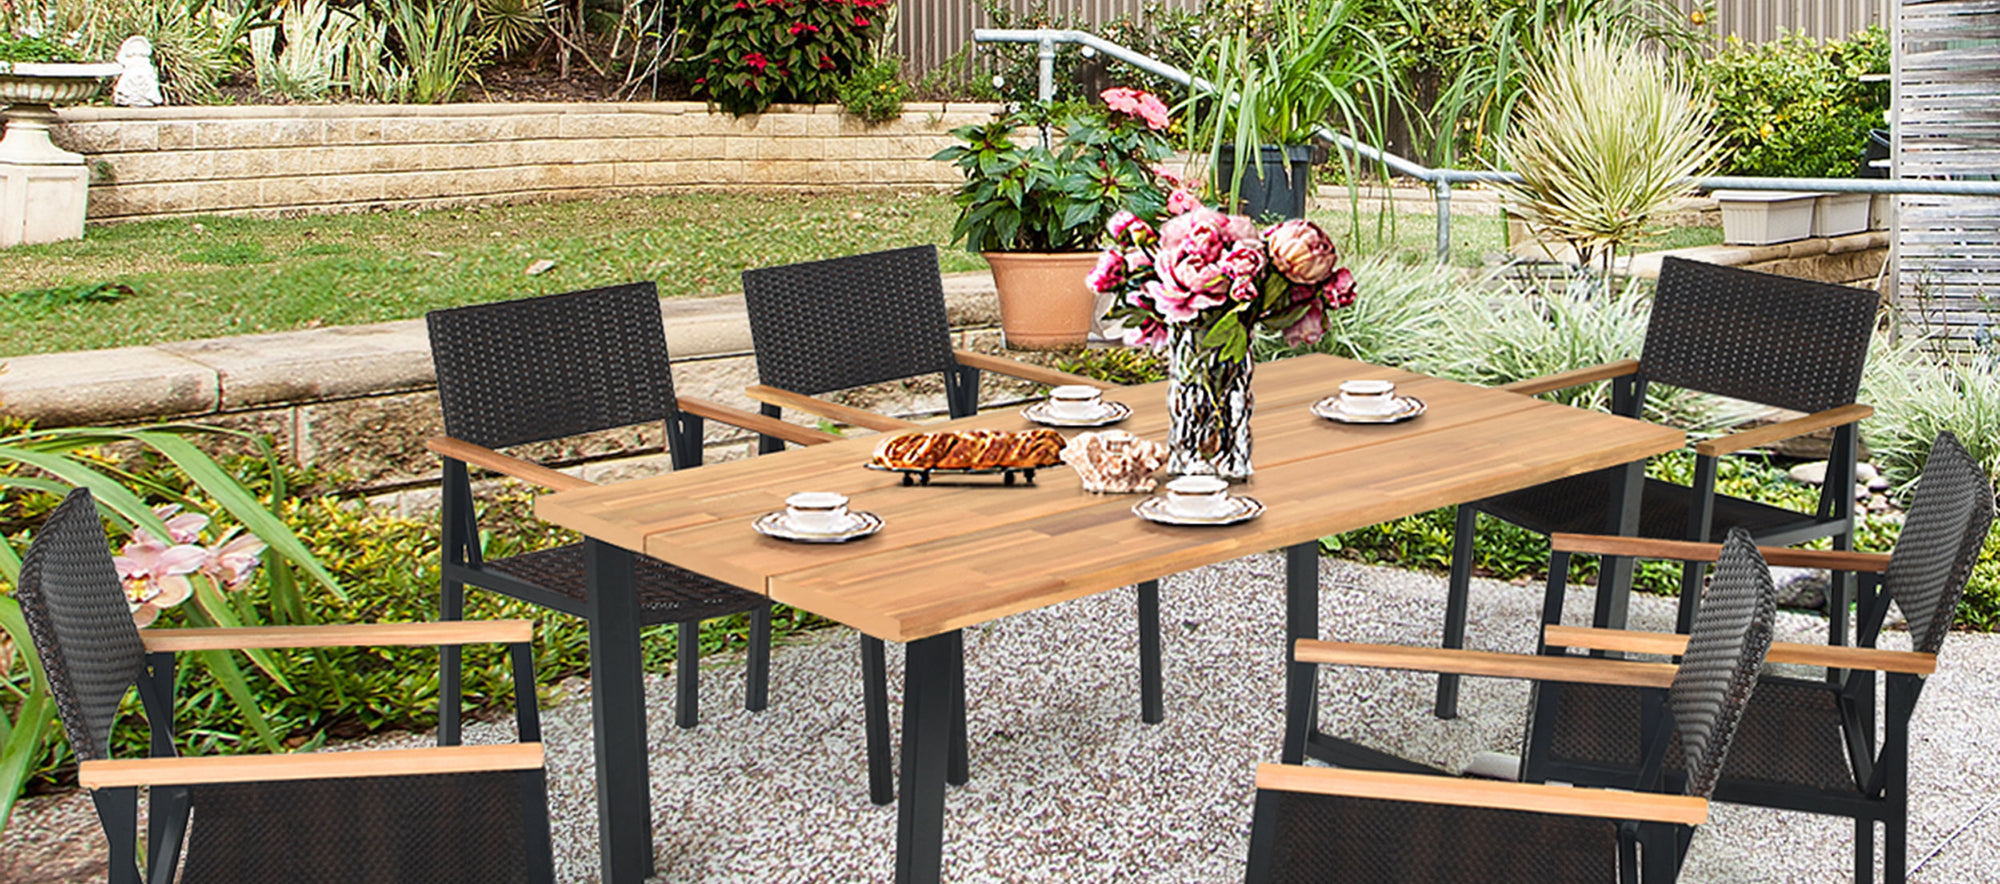 Four Simple Tips to Enhance Your Outdoor Entertaining Space